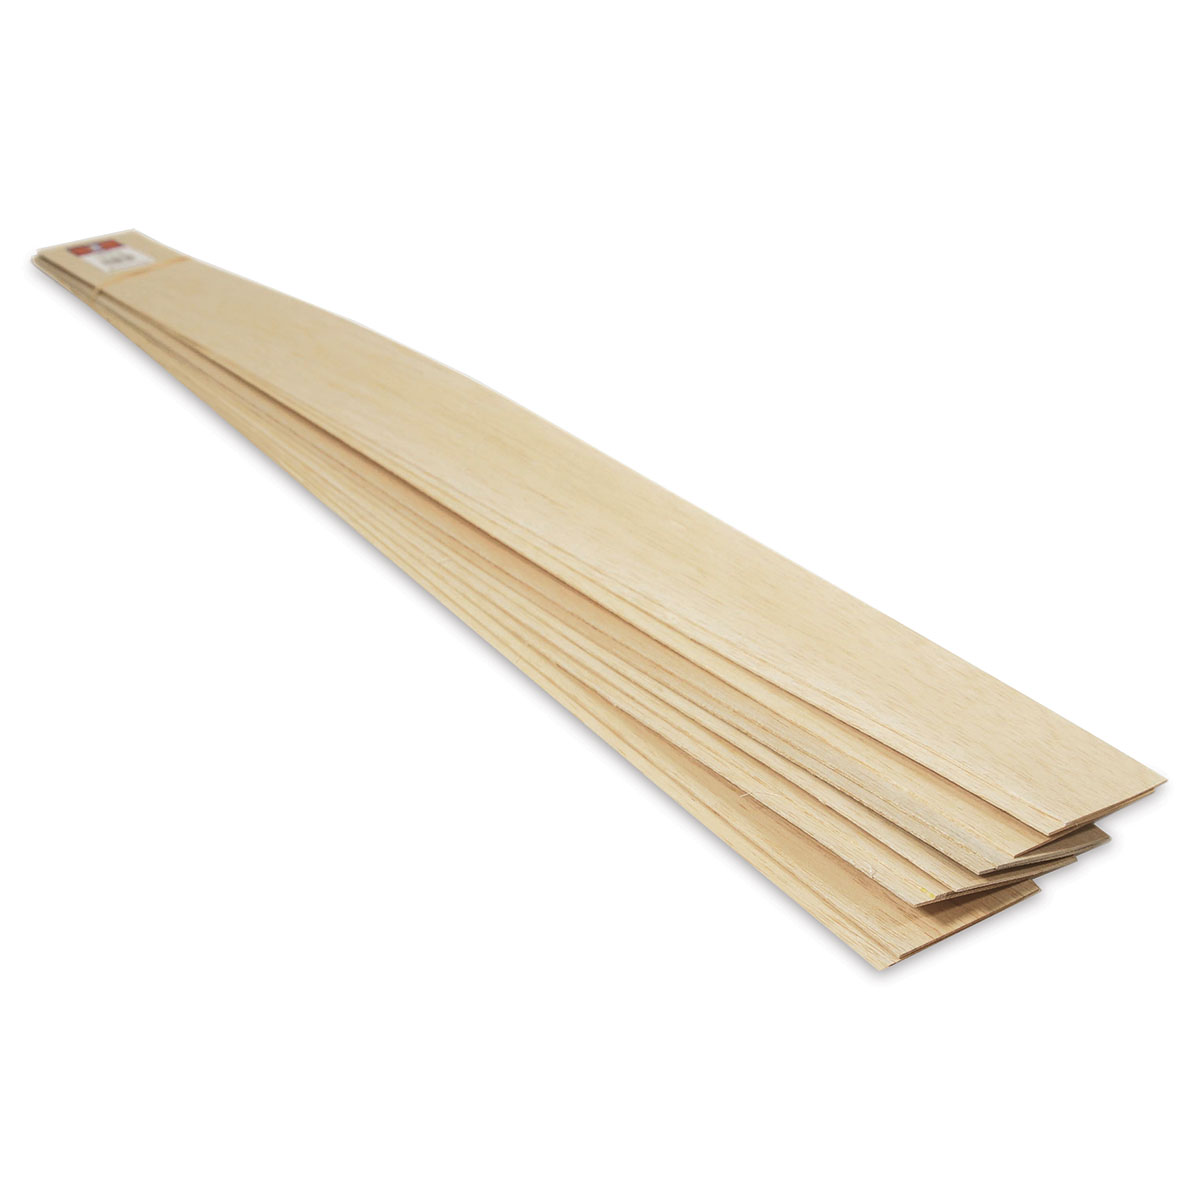 MIDWEST PRODUCTS 6302 BALSA WOOD SHEET 1/16X3X36 